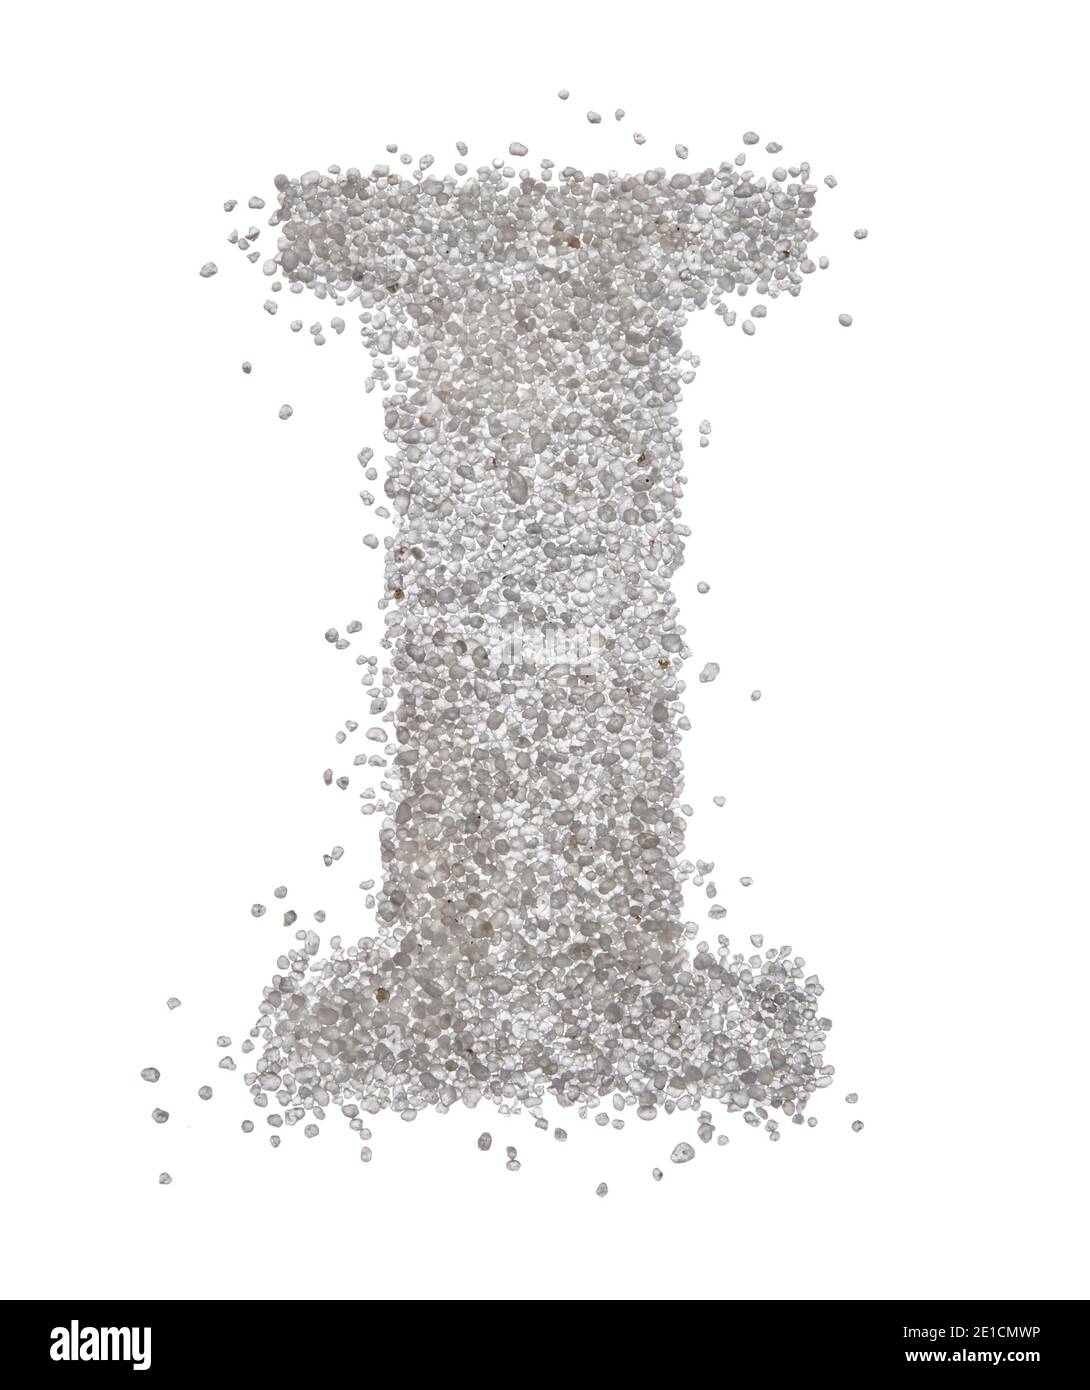 Serif sand letter capital I photographed on a white background Stock Photo